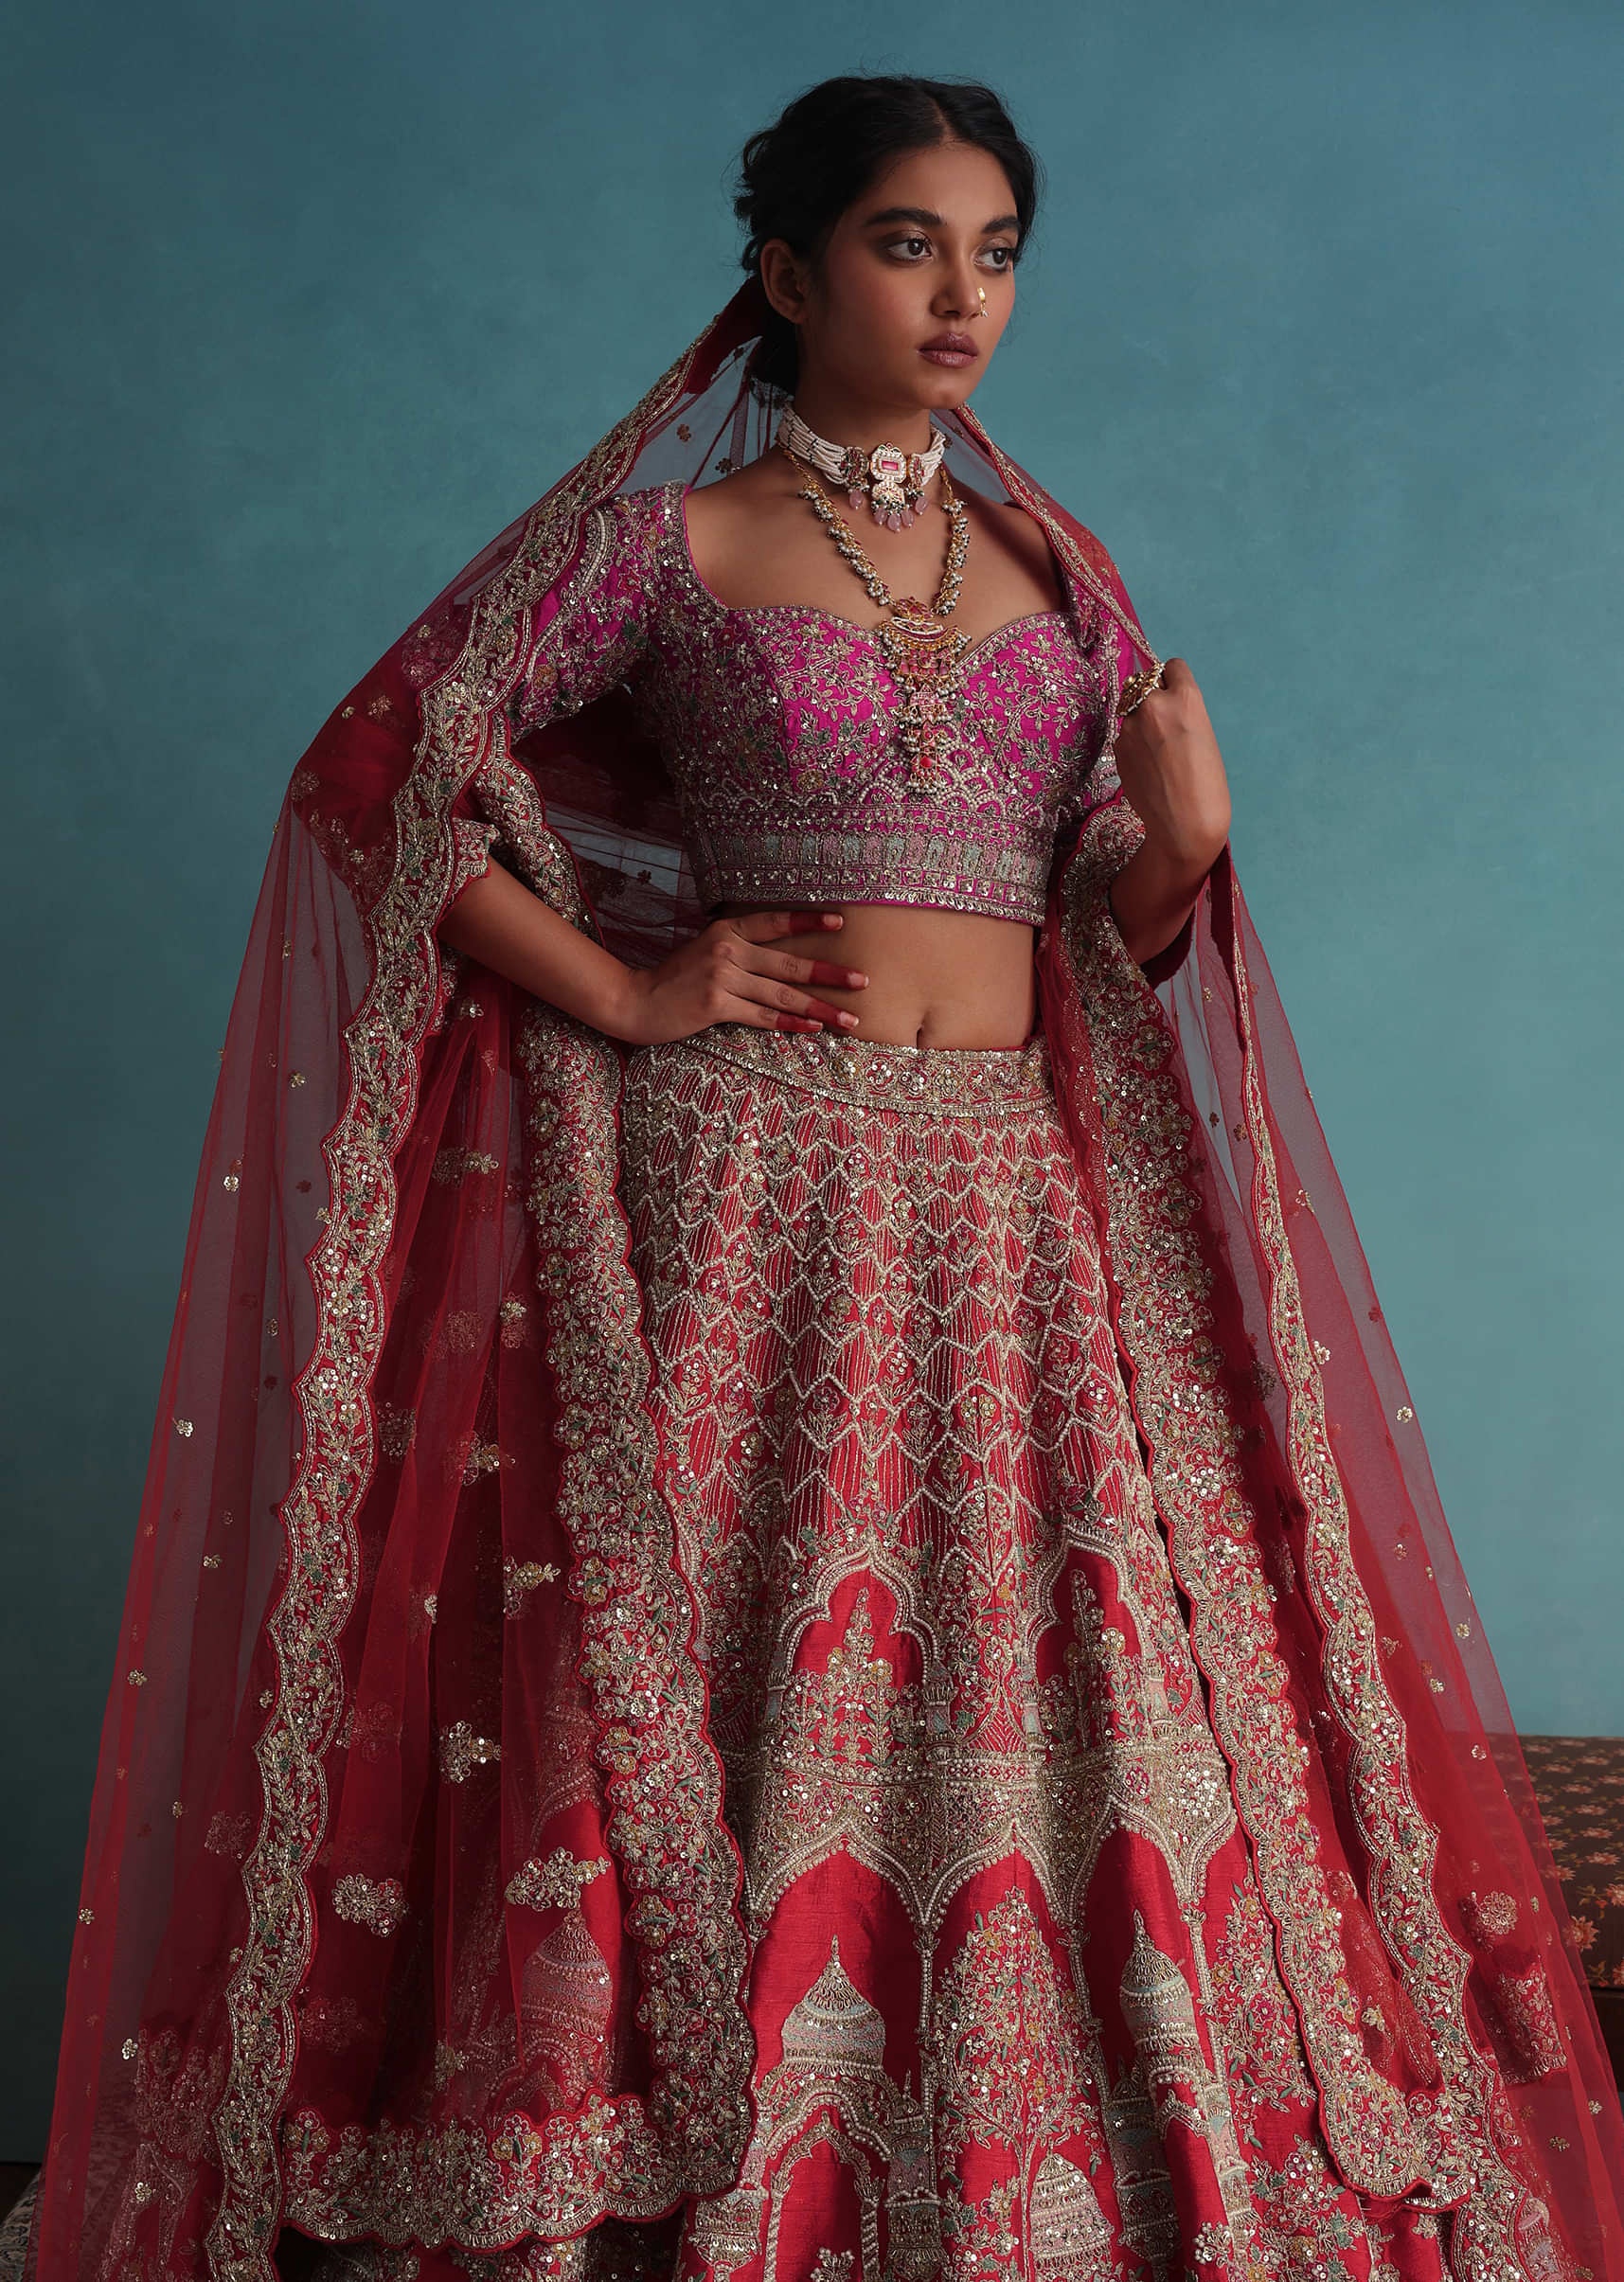 Tomato Red Embroidered 12 Kali Bridal Lehenga In Raw Silk With Cherry Pink Blouse And Veil Dupatta